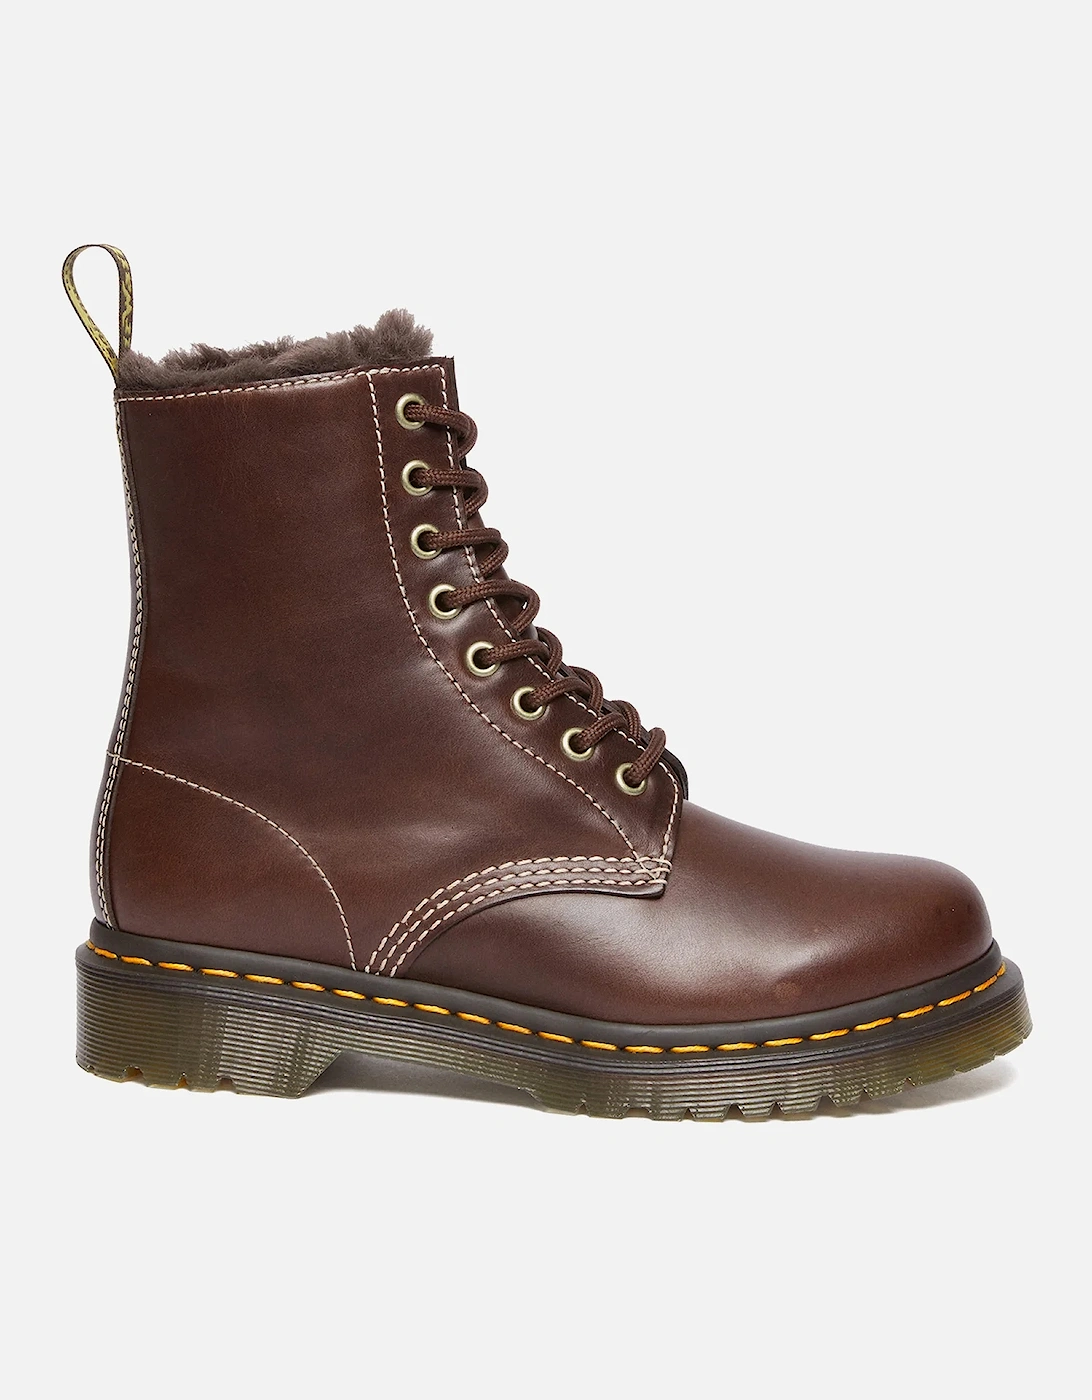 Dr. Martens Women's 1460 Serena Leather 8-Eye Boots - Dr. Martens - Home - Women's Shoes - Women's Boots - Dr. Martens Women's 1460 Serena Leather 8-Eye Boots, 2 of 1